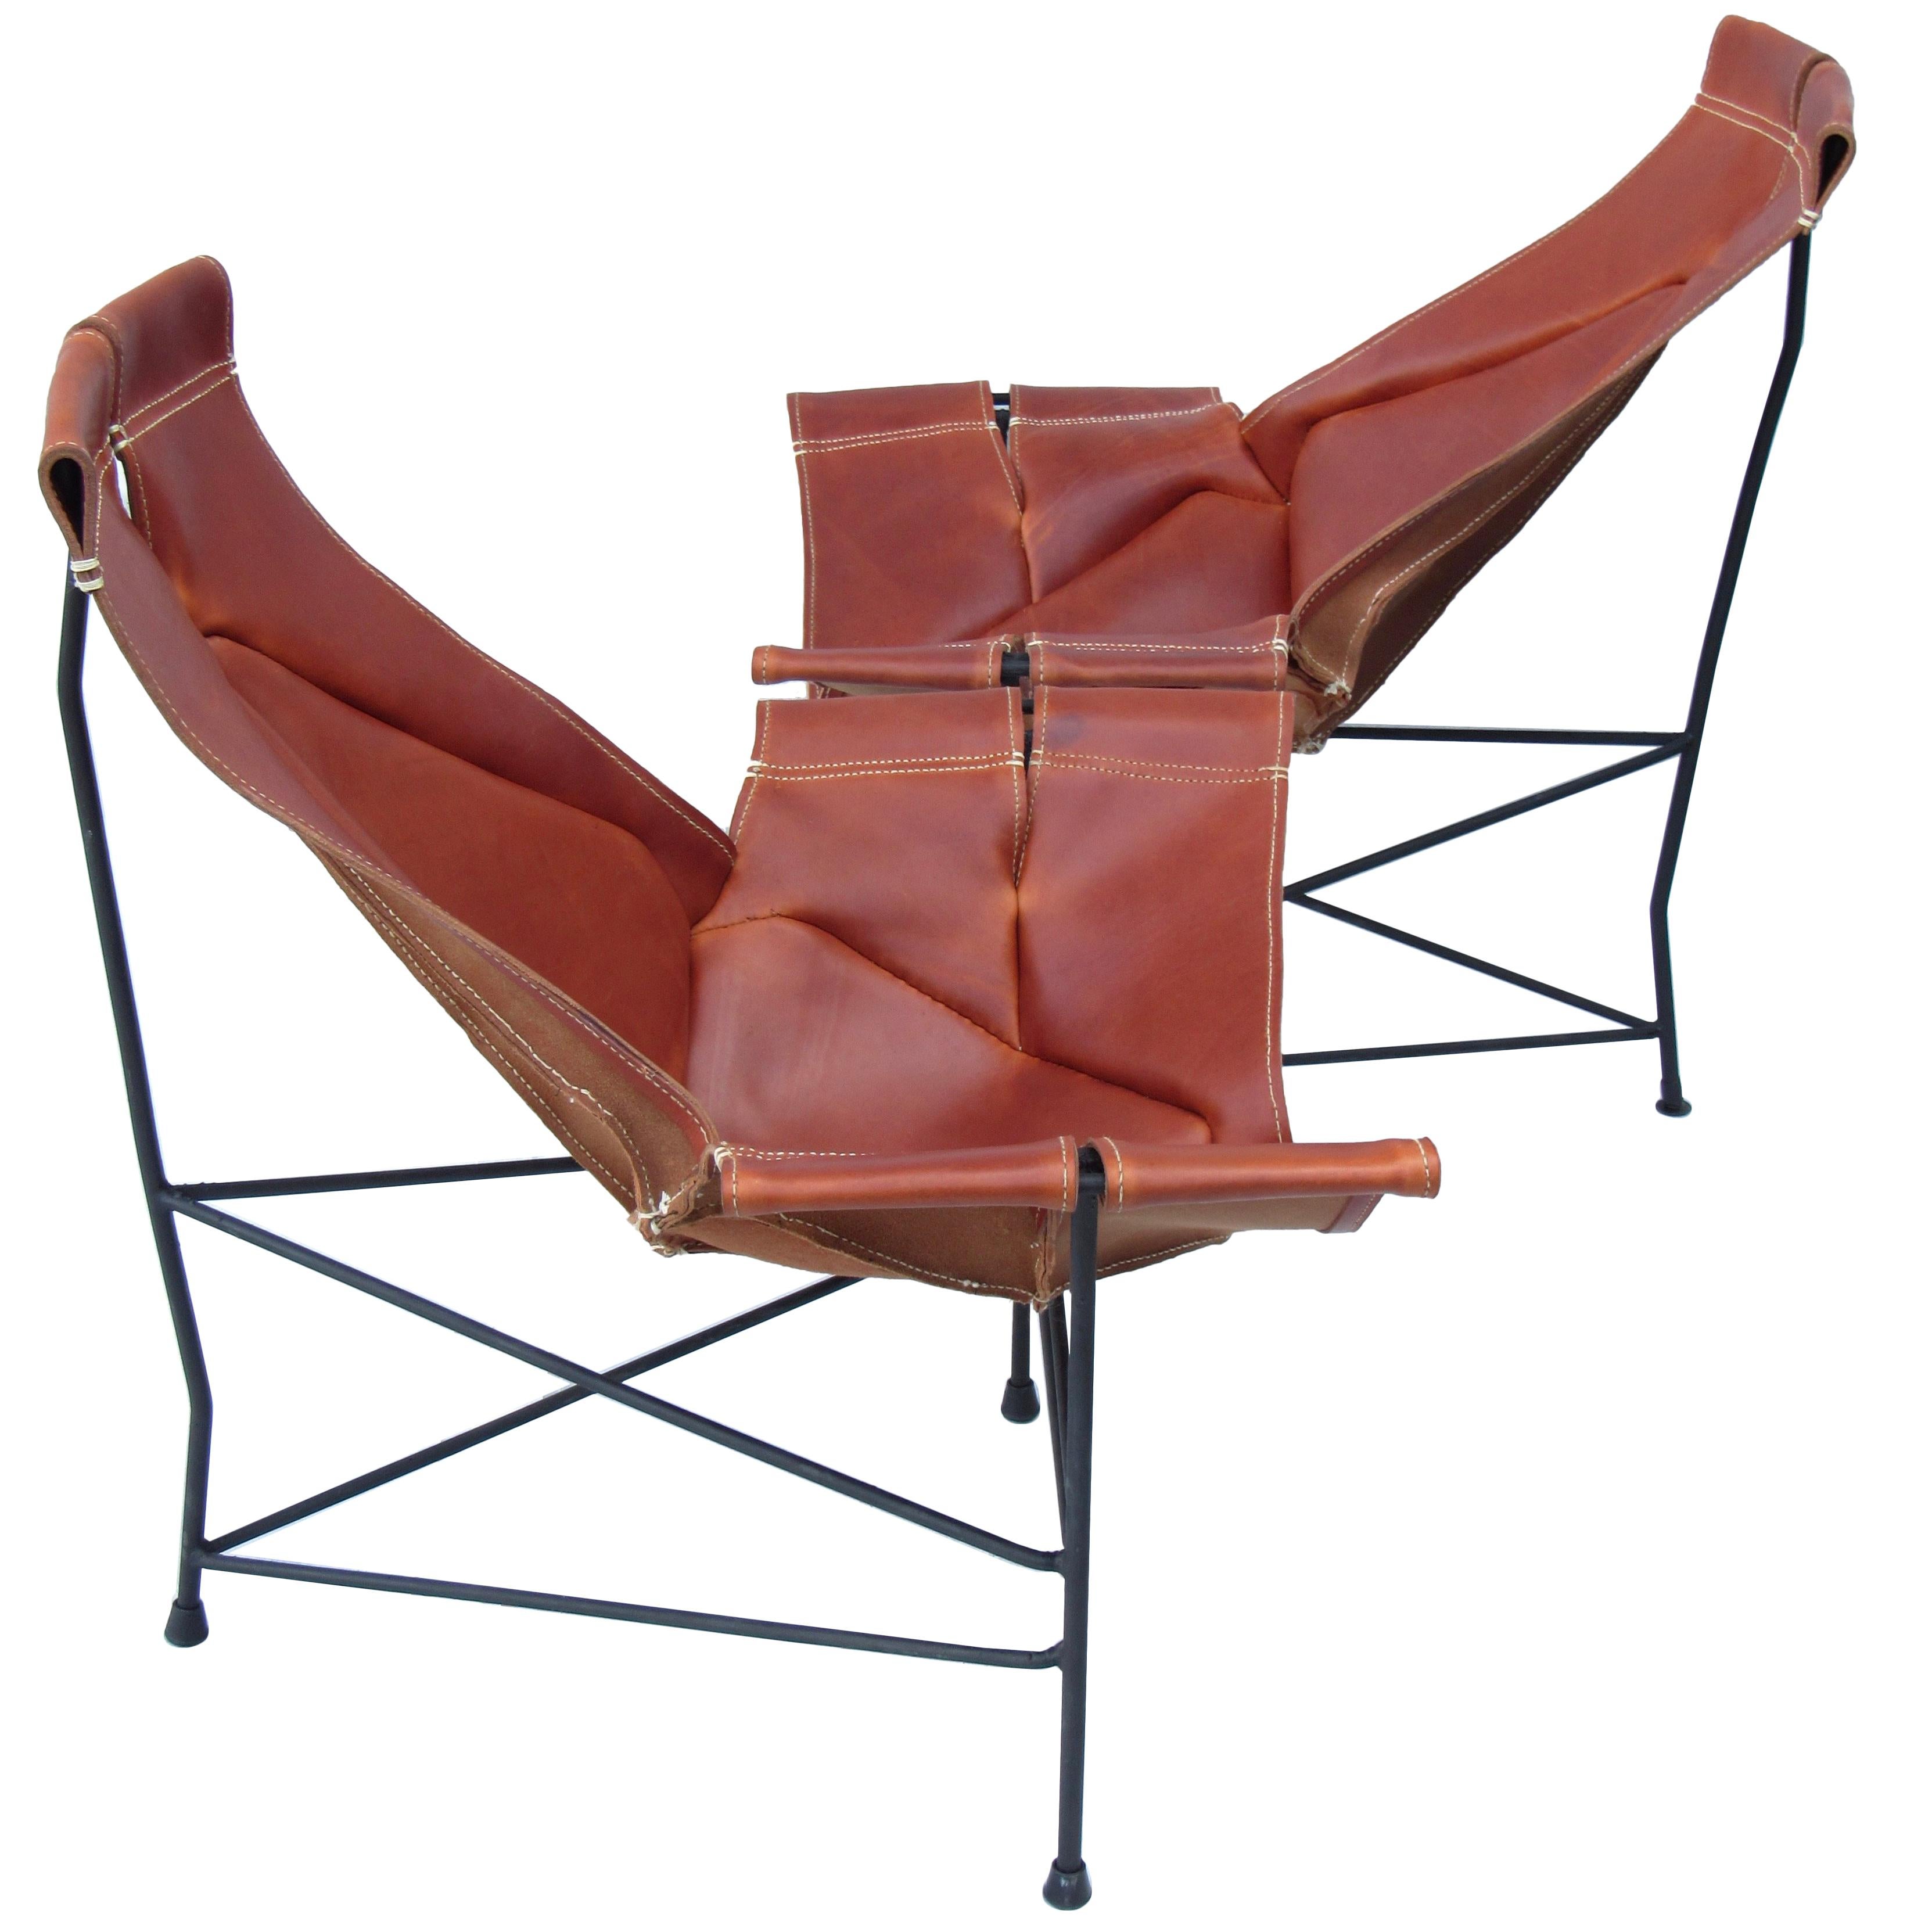 Wrought Iron Jerry Johnson Leather Sling Lounge Chair (3) Leathercraft 1954 For Sale